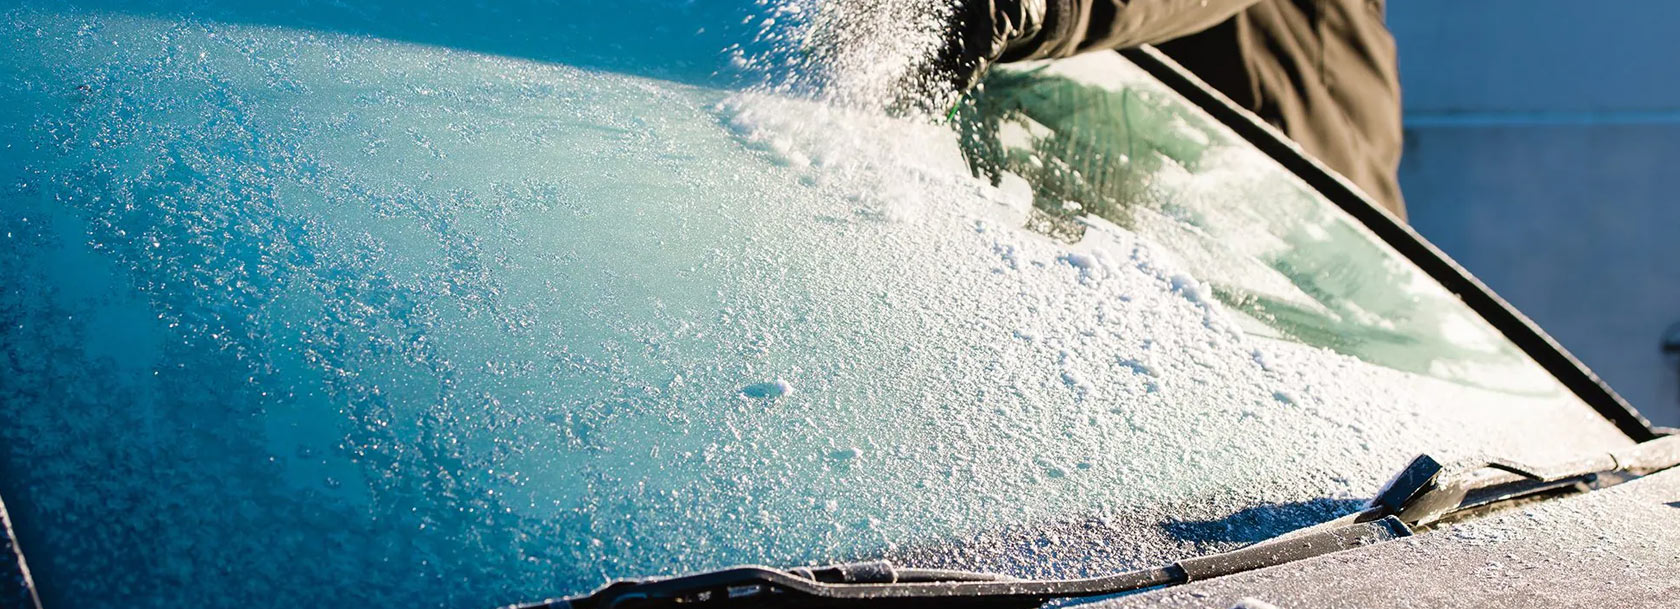 The Importance of a De-Iced Windscreen: Safety First on Winter Mornings